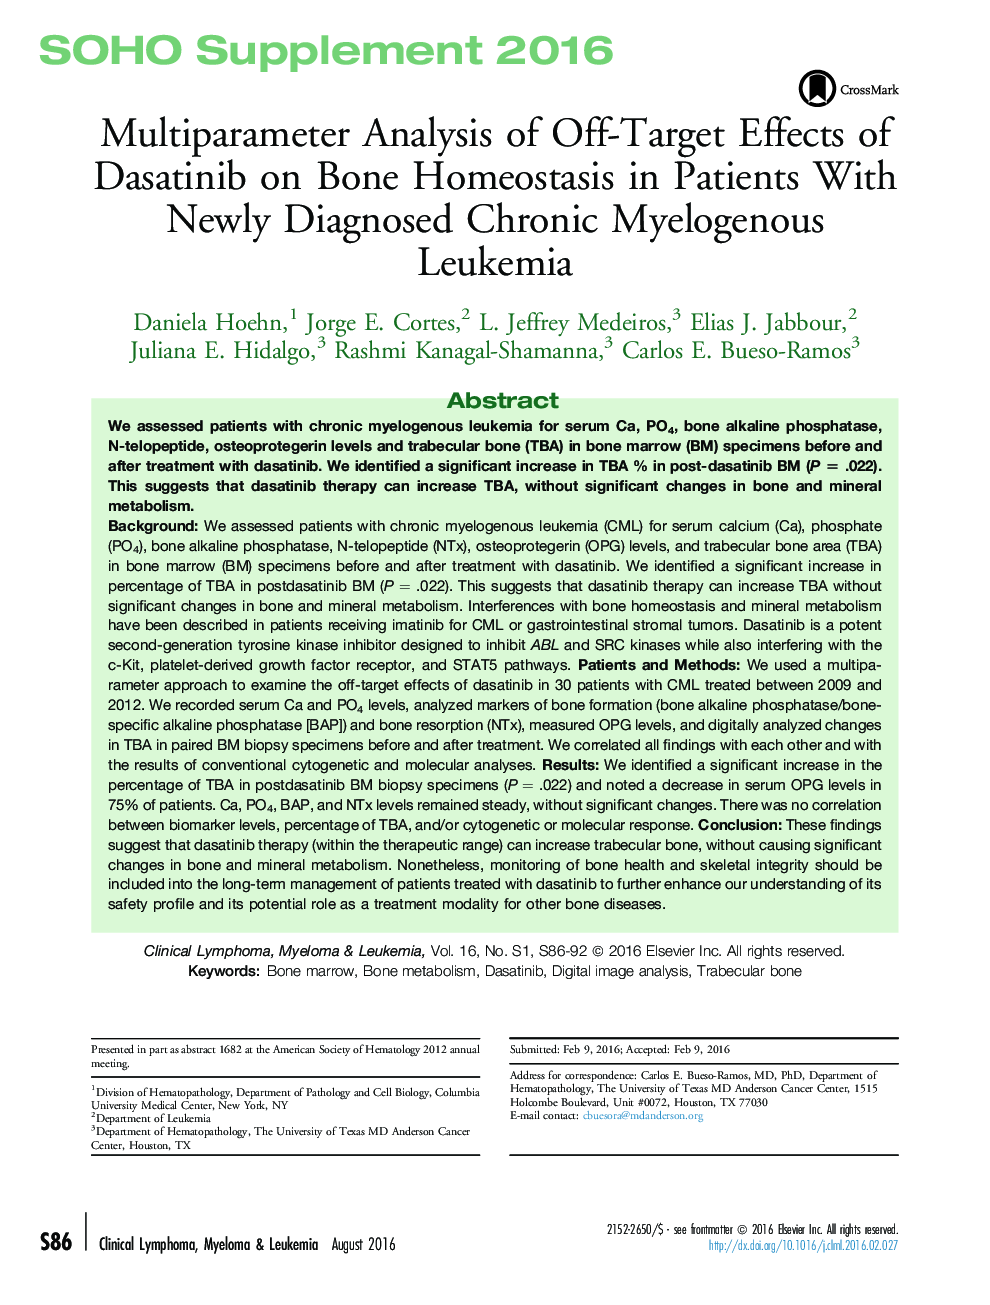 Multiparameter Analysis of Off-Target Effects of Dasatinib on Bone Homeostasis in Patients With Newly Diagnosed Chronic Myelogenous Leukemia